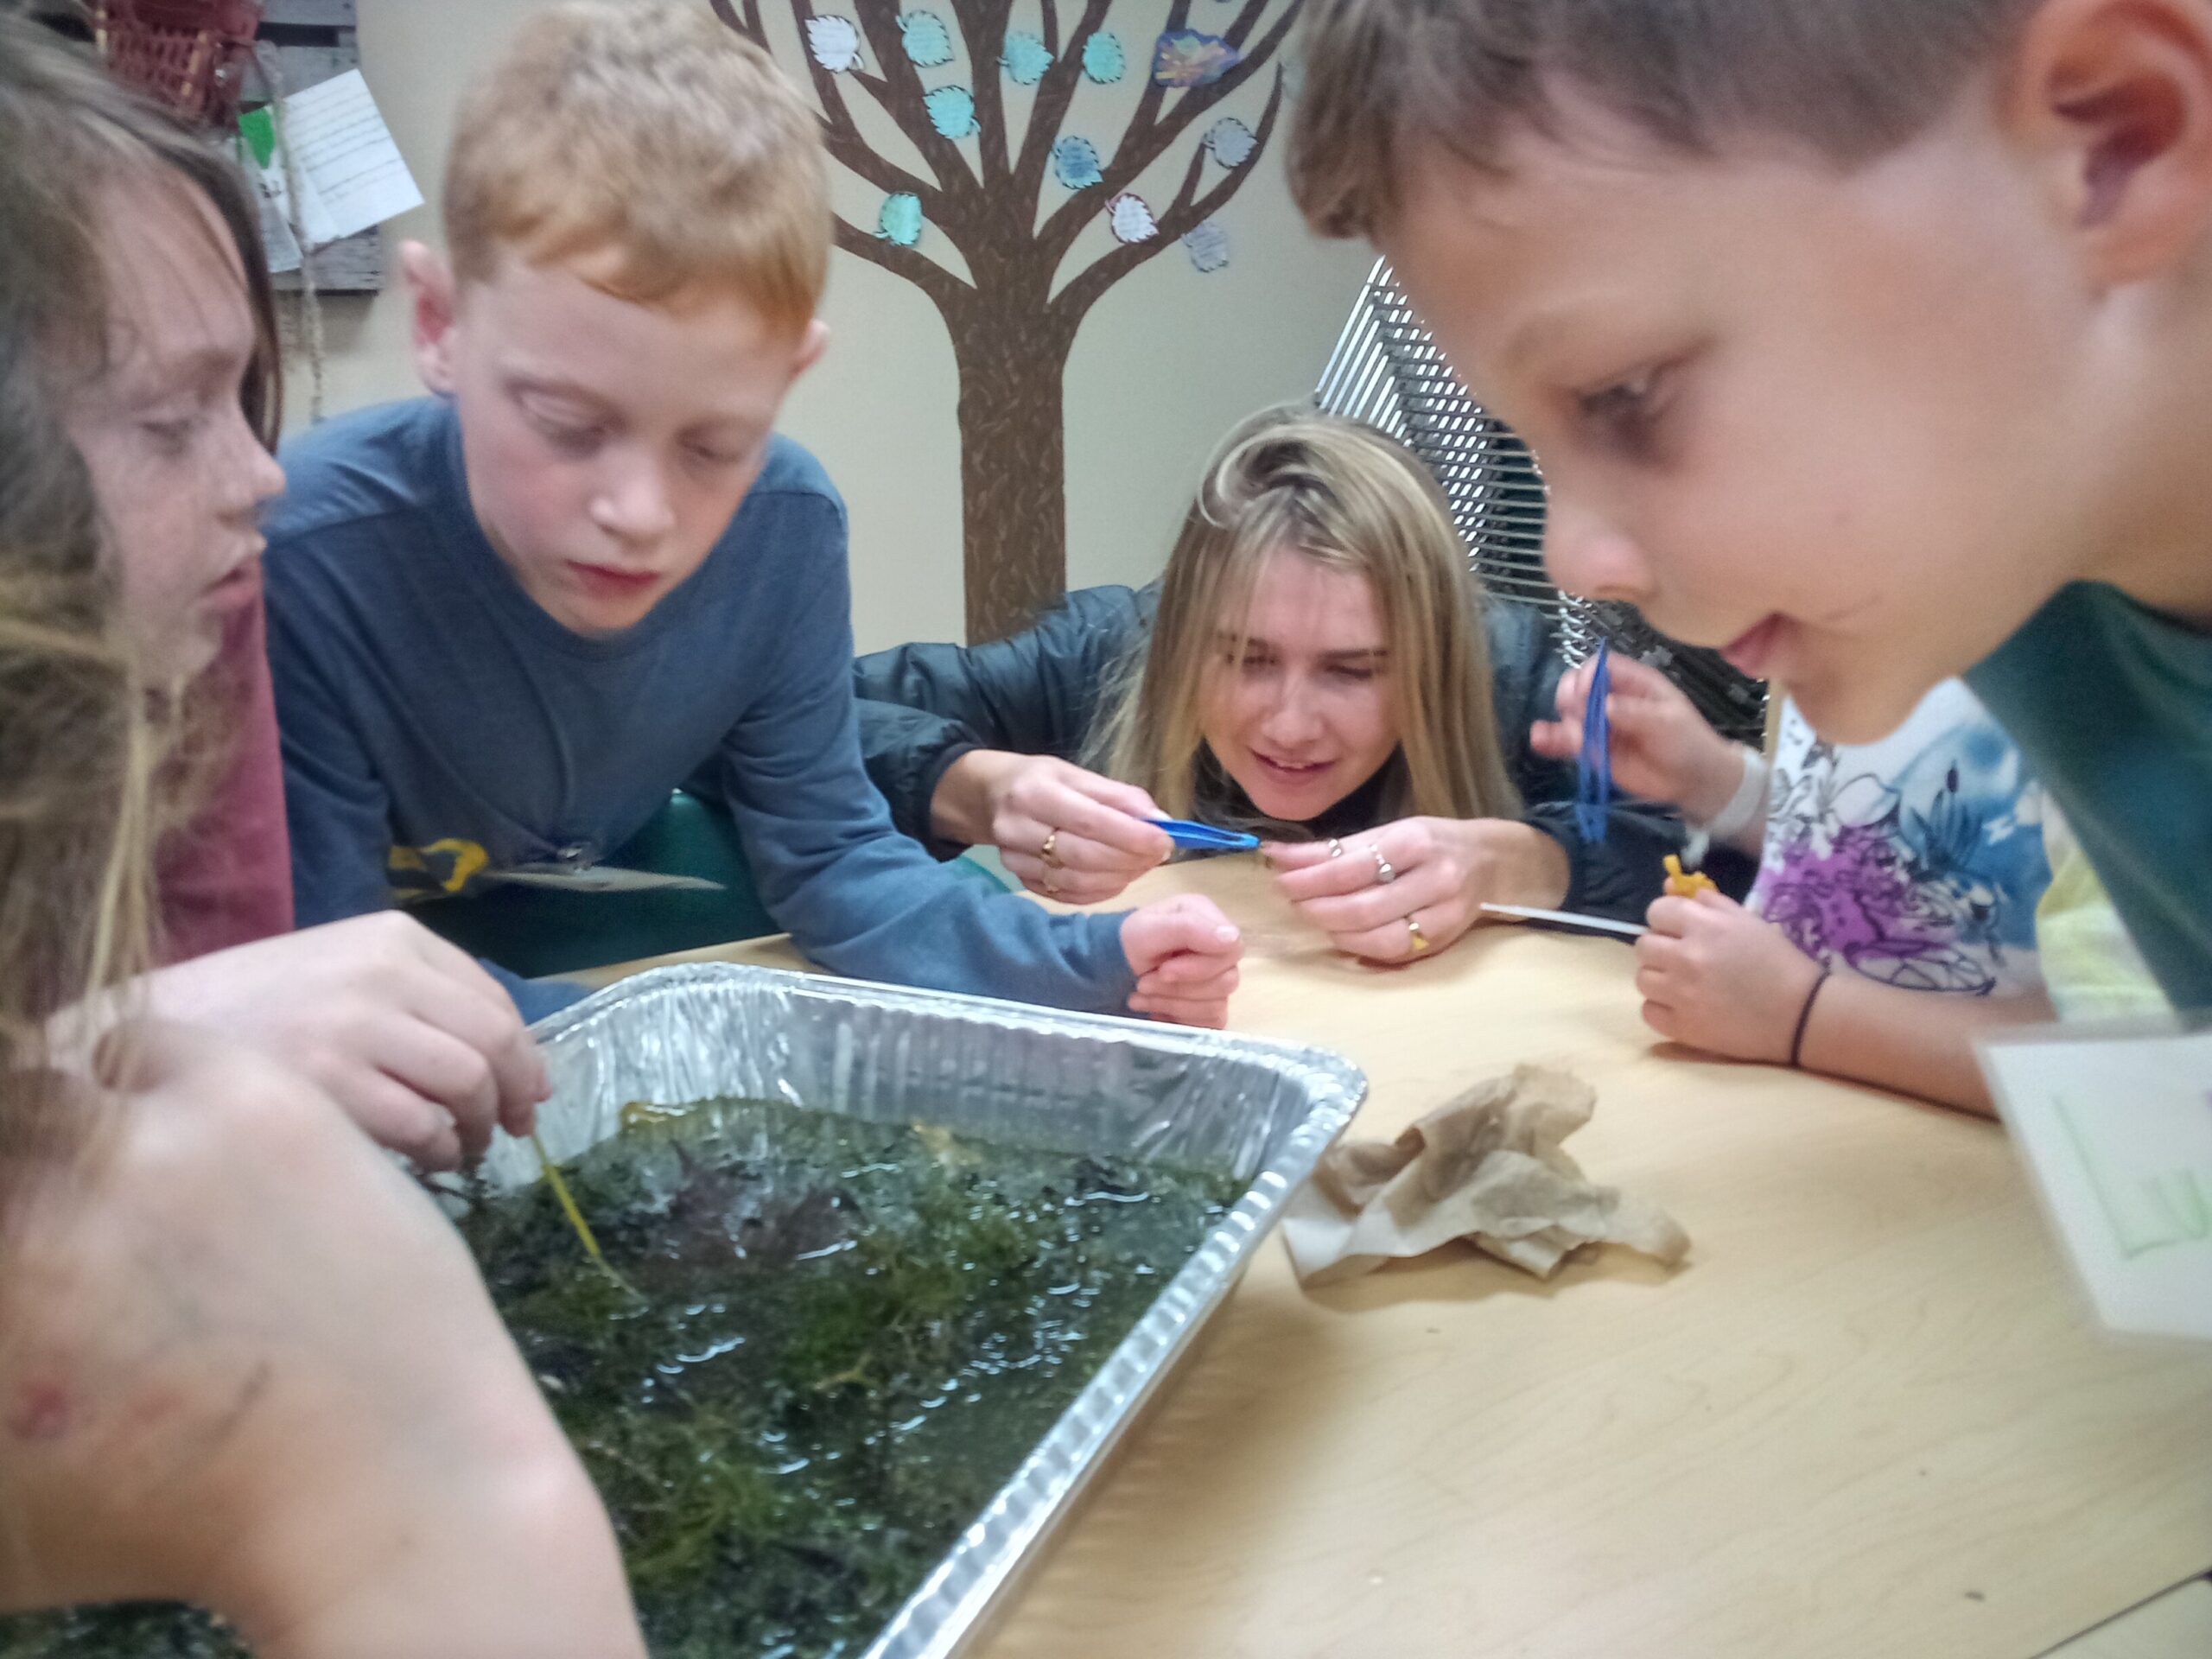 Three young learners looking into silver pan of marsh plants and water on a table with a female leader at the far end of the table with tweezers.